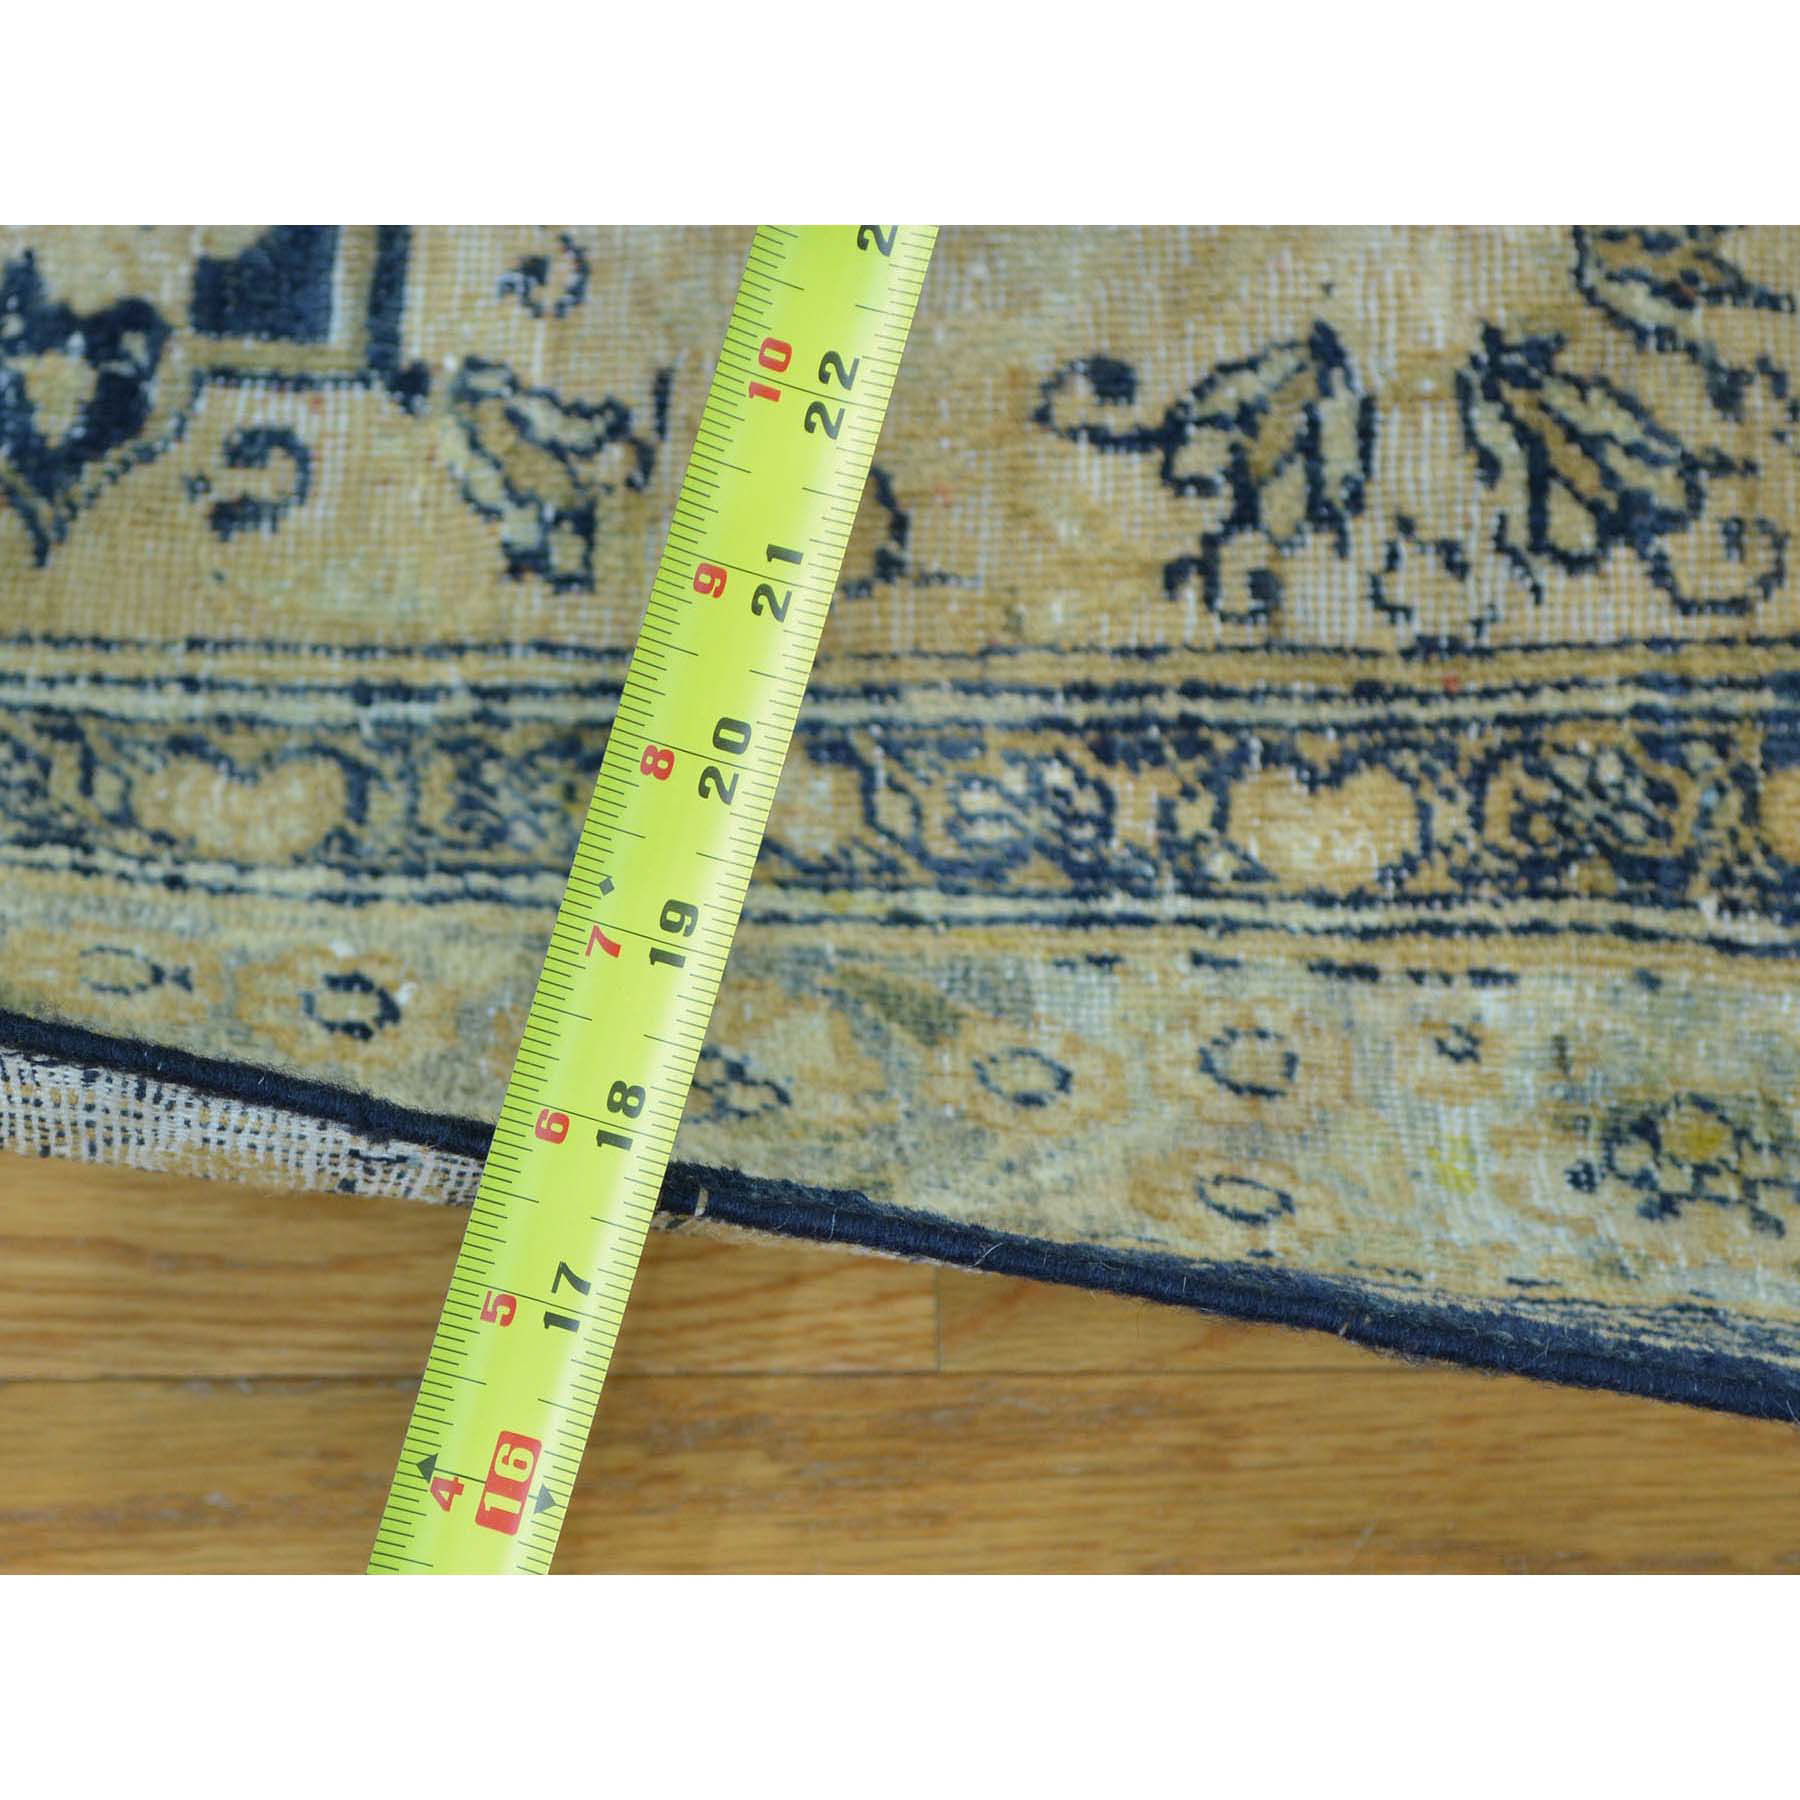 9-5 x14- Antique Persian Kerman Exc Cond Hand Knotted Oriental Rug 